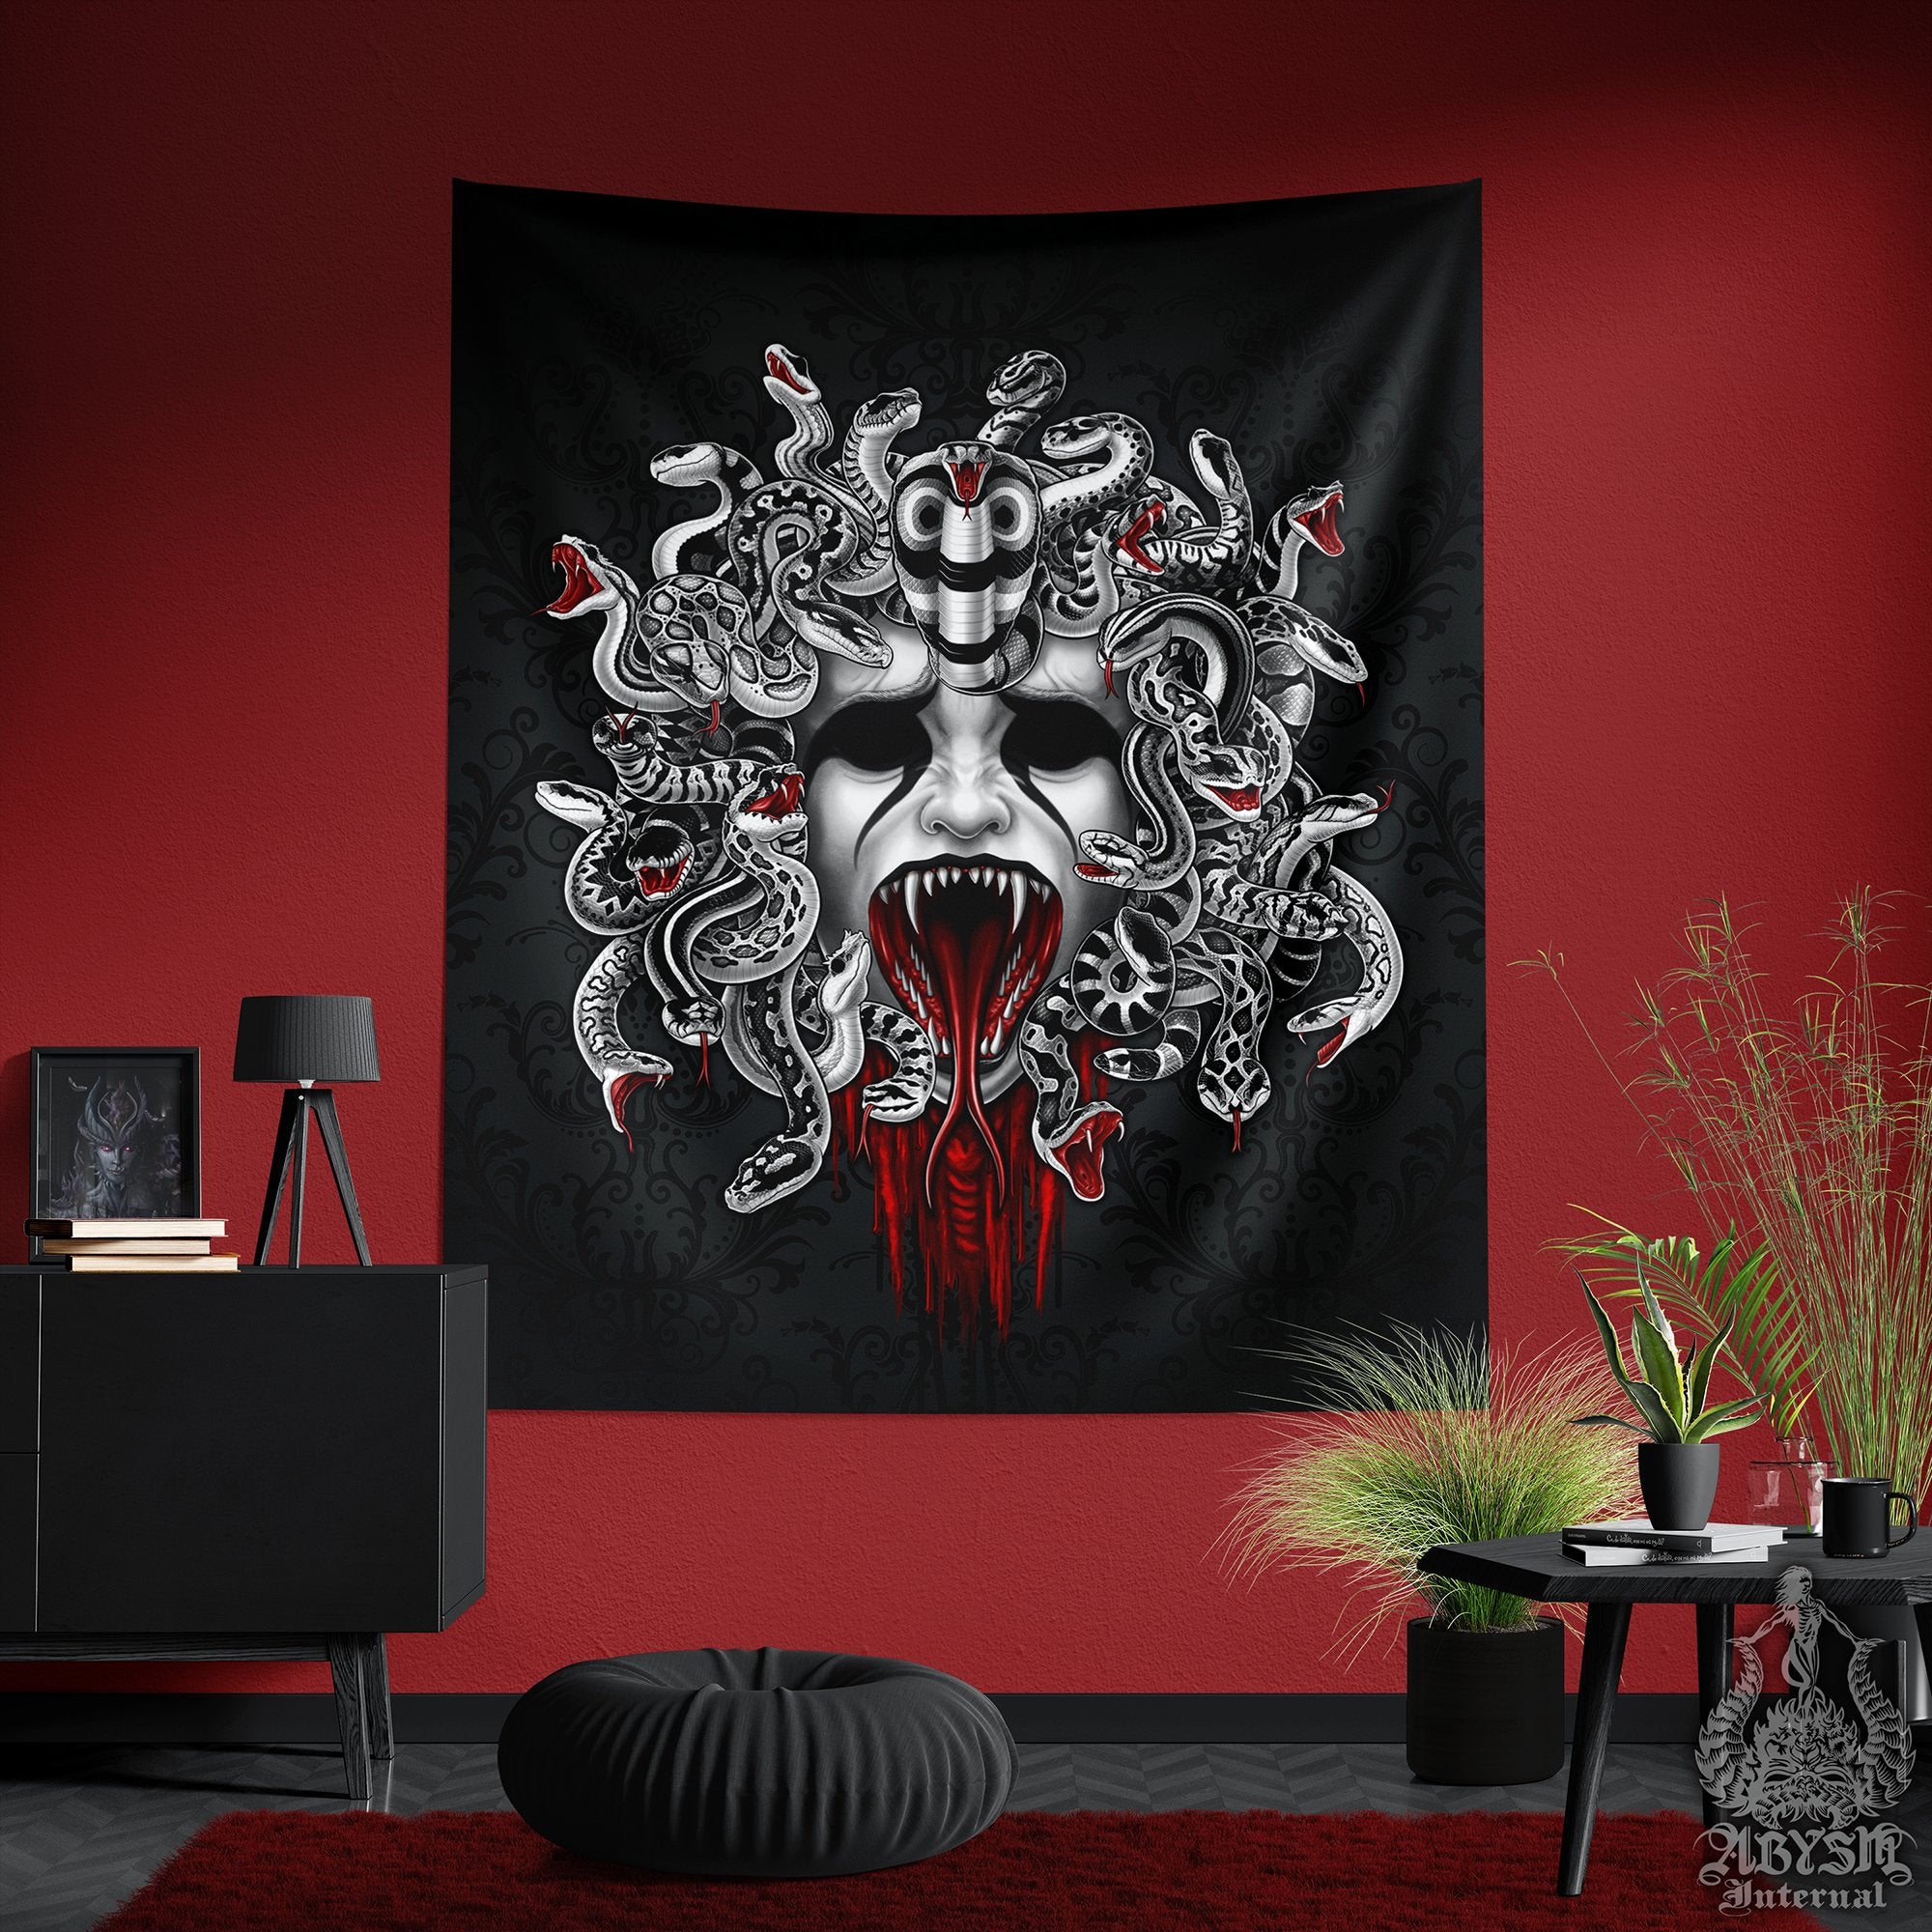 Gothic Tapestry, Medusa & Skull Wall Hanging, Nu Goth Home Decor, Vertical Art Print - 2 Faces, 3 Colors - Abysm Internal